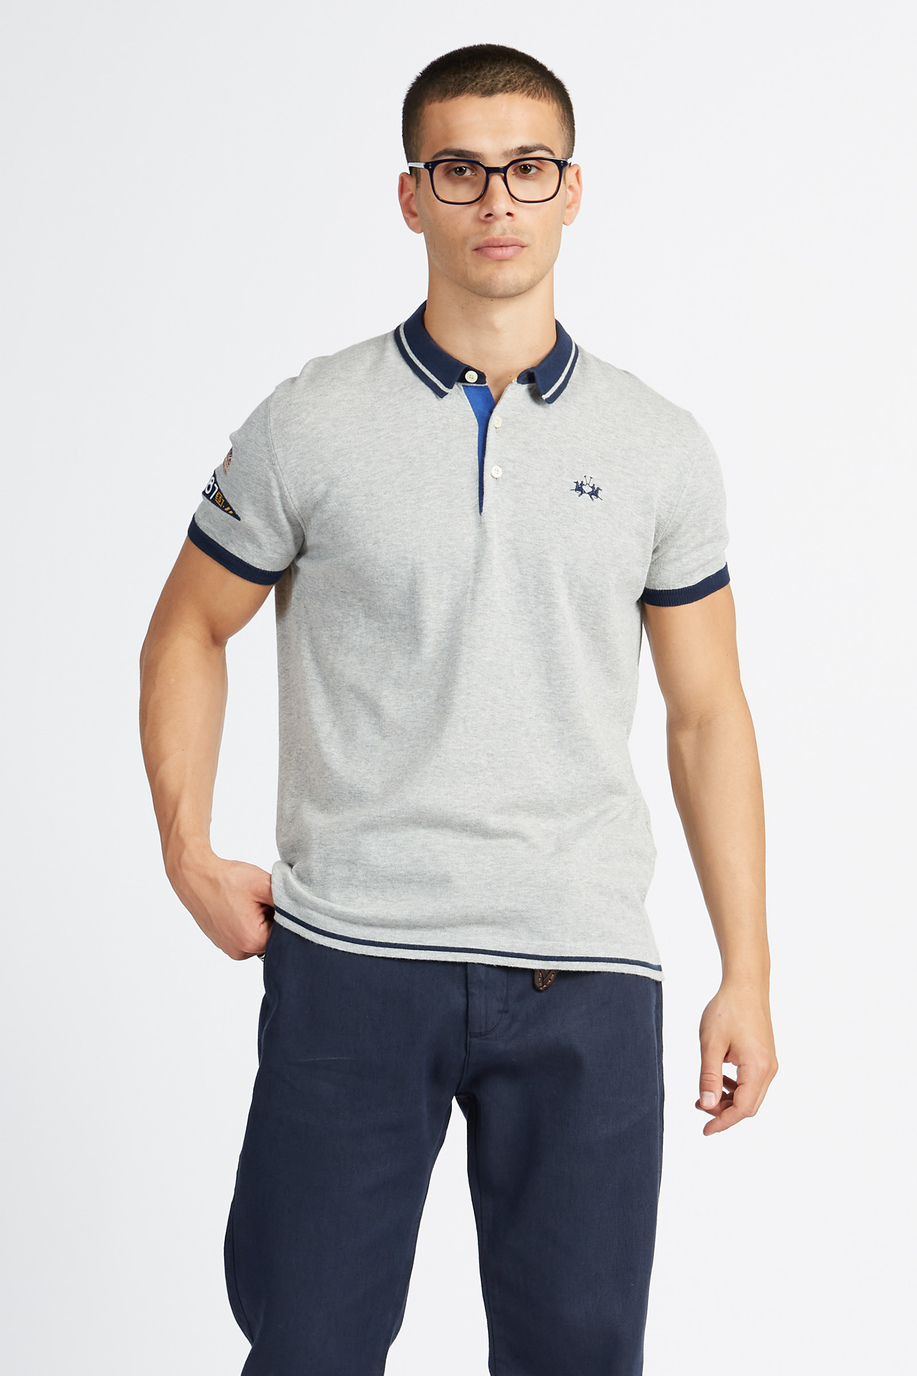 Short-sleeved men's tricot polo in solid color - Victorin - Preview  | La Martina - Official Online Shop